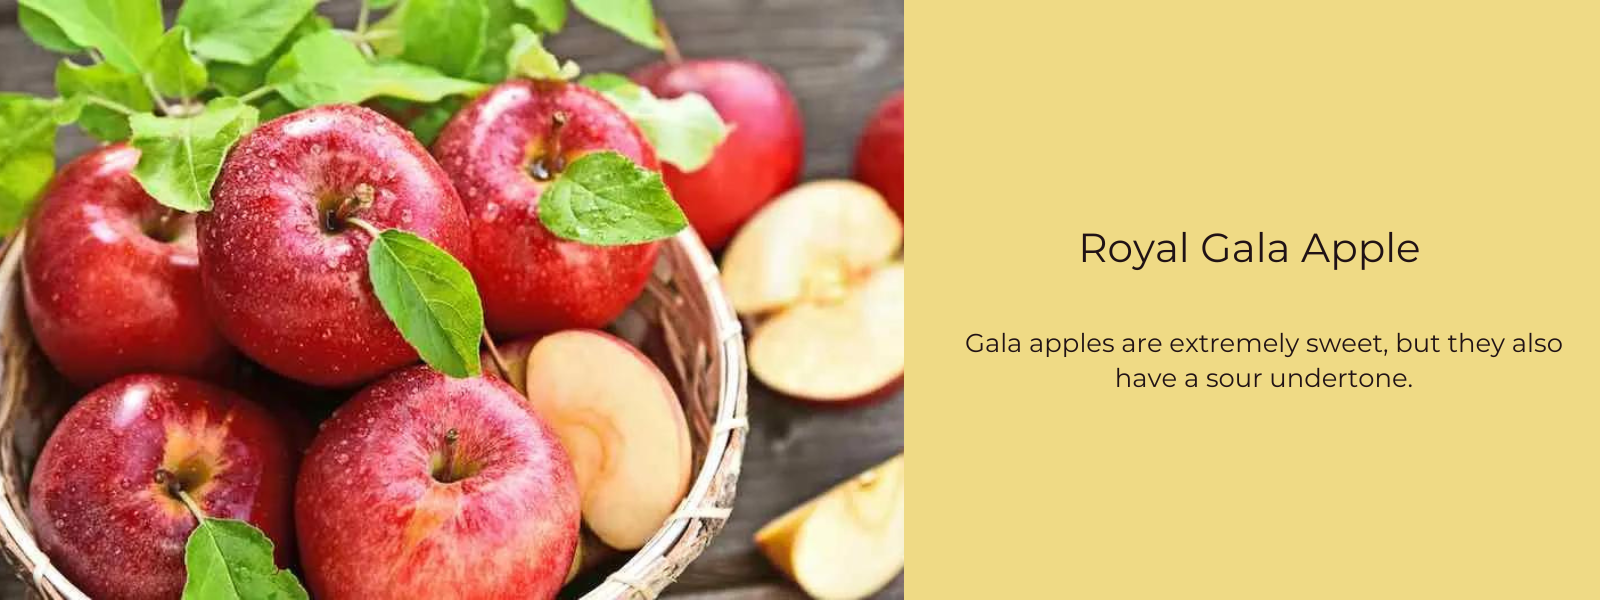 How Many Calories in a Gala Apple?